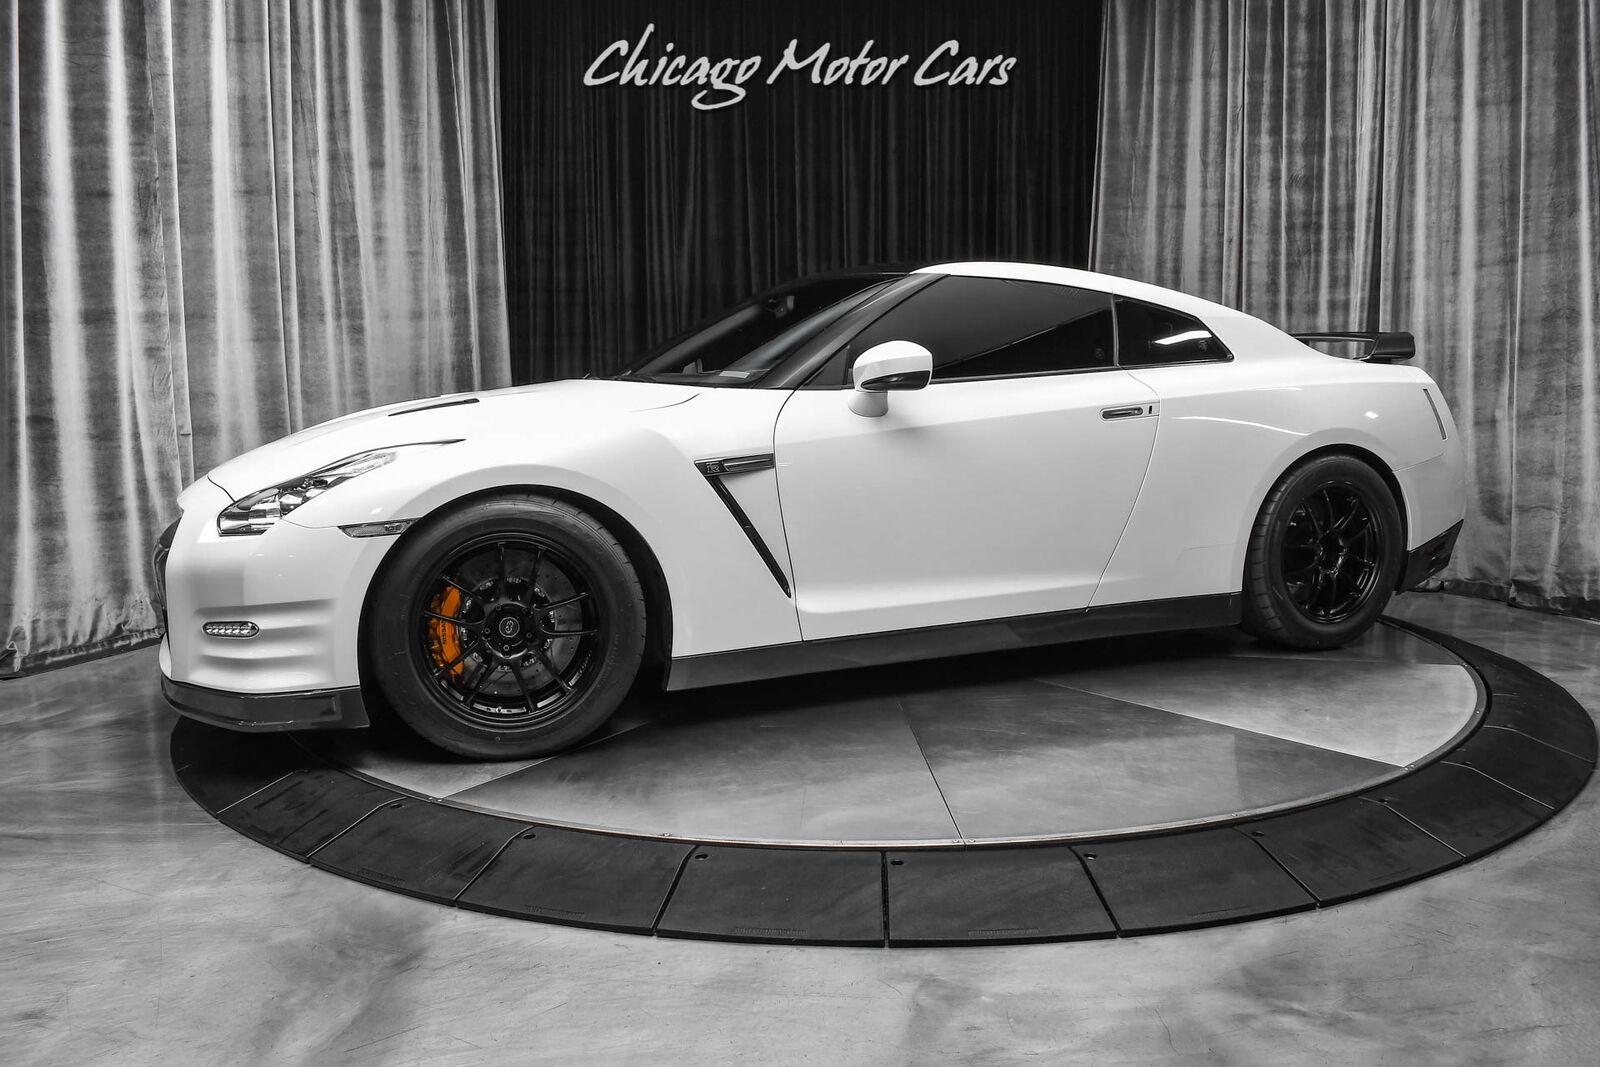 2014 Nissan Gt-r Black Edition Coupe 1000+ Horsepower! Ams Omega 12 2014 Nissan Gt-r Black Edition Coupe 1000+ Horsepower! Ams Omega 12 Pearl White